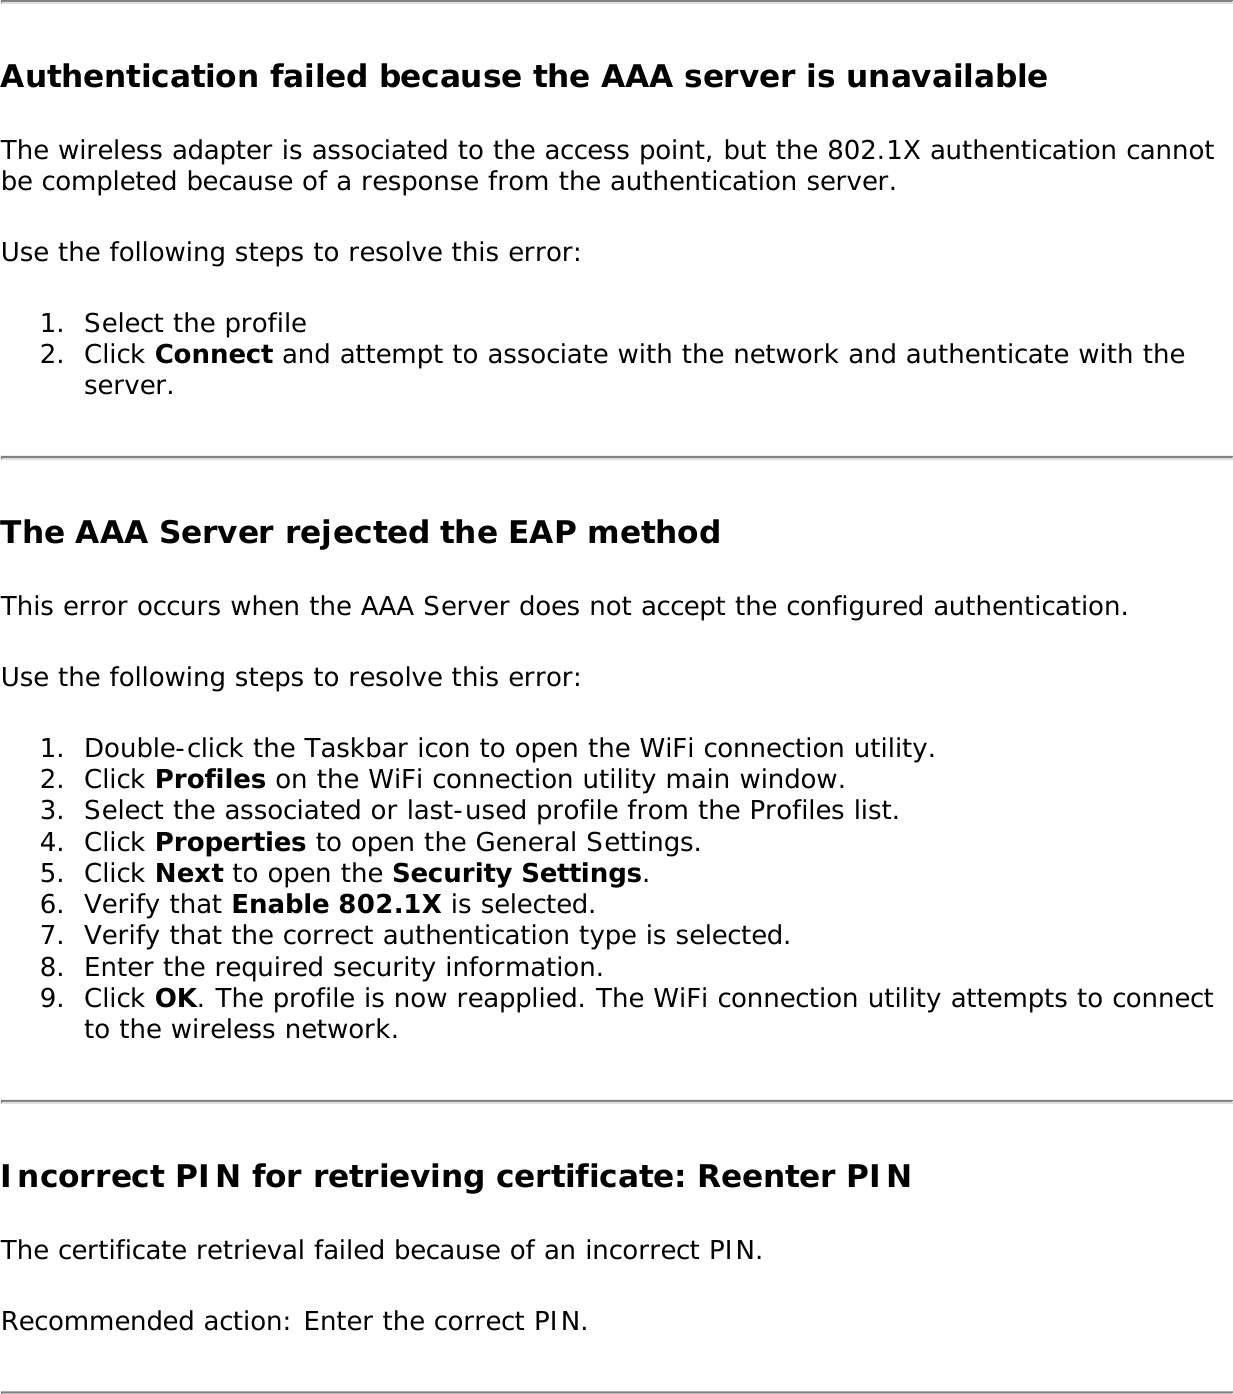 Authentication failed because the AAA server is unavailableThe wireless adapter is associated to the access point, but the 802.1X authentication cannot be completed because of a response from the authentication server. Use the following steps to resolve this error: 1.  Select the profile2.  Click Connect and attempt to associate with the network and authenticate with the server.The AAA Server rejected the EAP methodThis error occurs when the AAA Server does not accept the configured authentication. Use the following steps to resolve this error: 1.  Double-click the Taskbar icon to open the WiFi connection utility.2.  Click Profiles on the WiFi connection utility main window.3.  Select the associated or last-used profile from the Profiles list. 4.  Click Properties to open the General Settings.5.  Click Next to open the Security Settings. 6.  Verify that Enable 802.1X is selected. 7.  Verify that the correct authentication type is selected. 8.  Enter the required security information. 9.  Click OK. The profile is now reapplied. The WiFi connection utility attempts to connect to the wireless network. Incorrect PIN for retrieving certificate: Reenter PIN The certificate retrieval failed because of an incorrect PIN. Recommended action: Enter the correct PIN. 